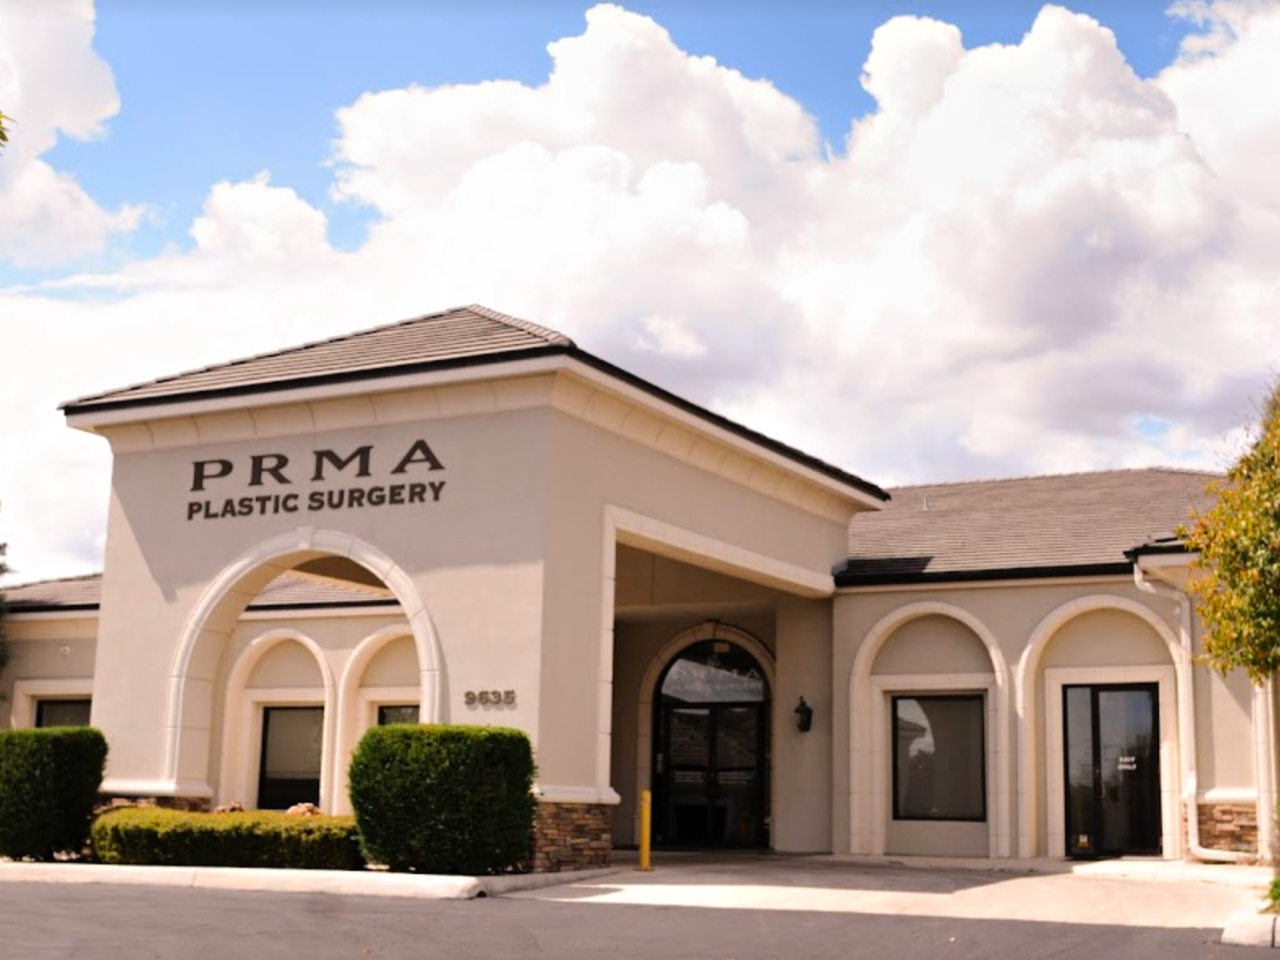 PRMA Plastic Surgery, San Antonio & Stone Oak, Texas | Specialists in breast reconstruction, microsurgery, restoring feeling after mastectomy, aesthetic plastic surgery, cosmetic surgery, TruSense®, High Definition DIEP flap